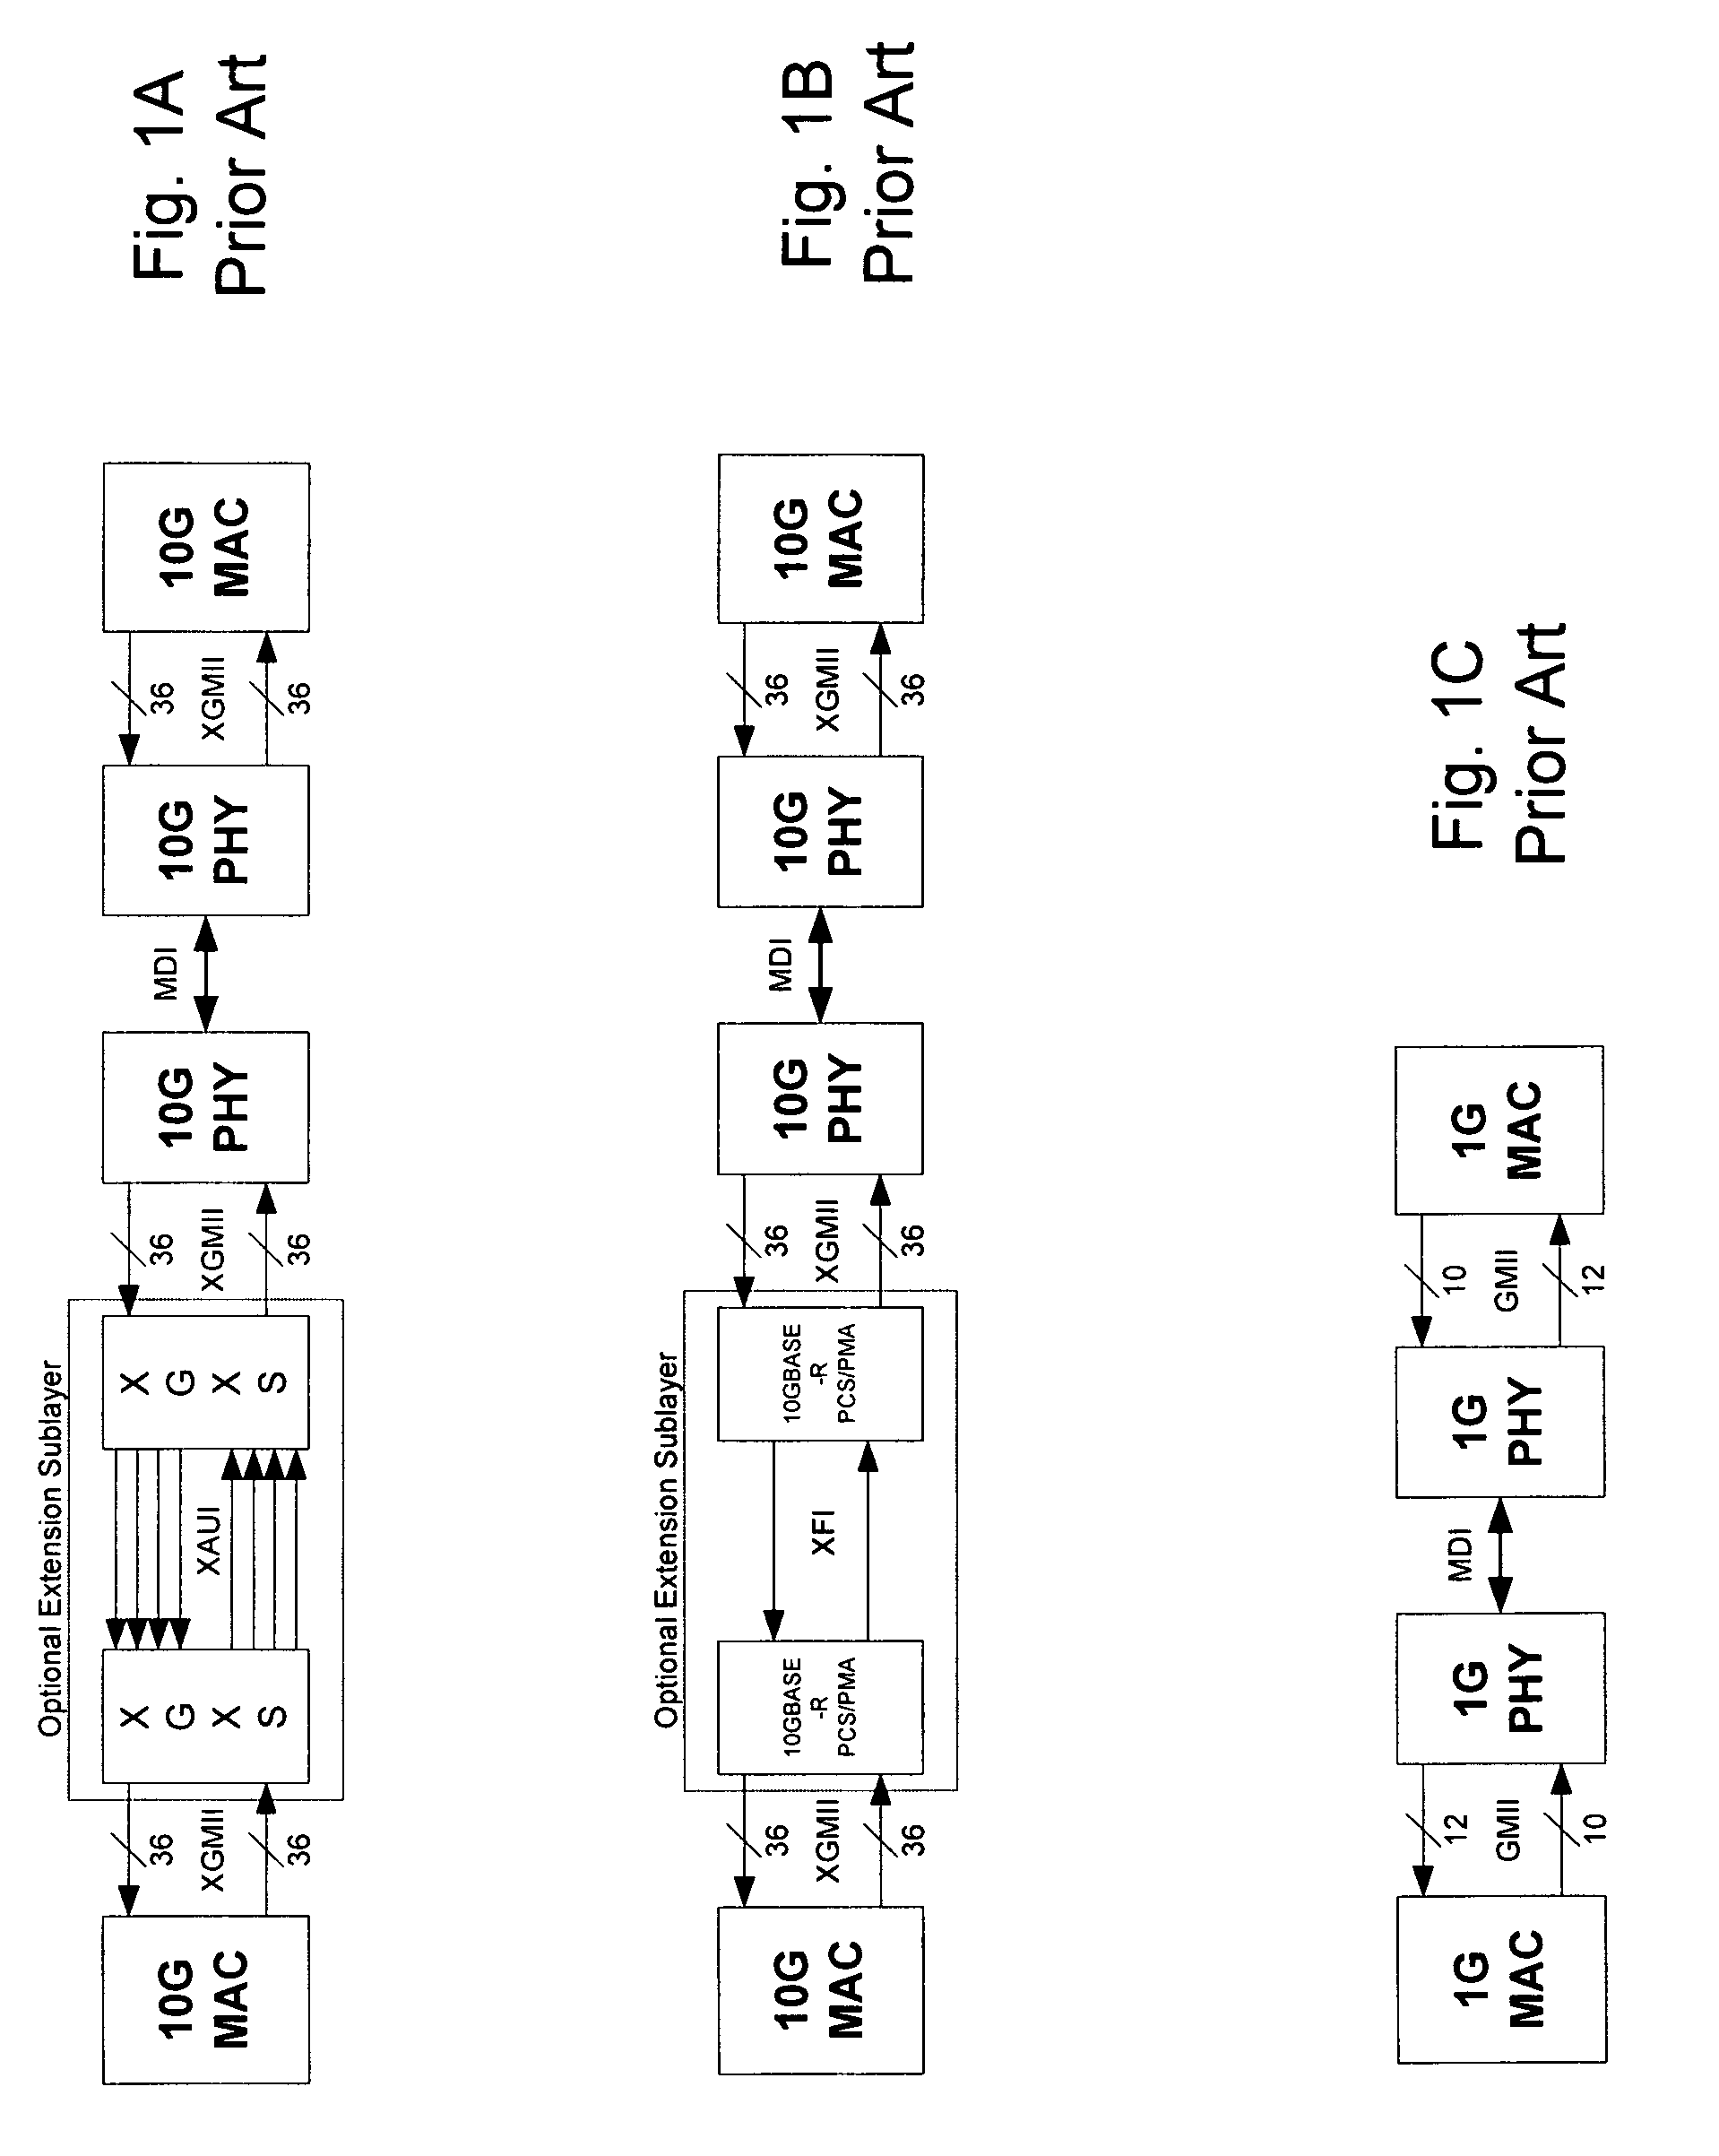 Method and system for a multi-rate gigabit media independent interface